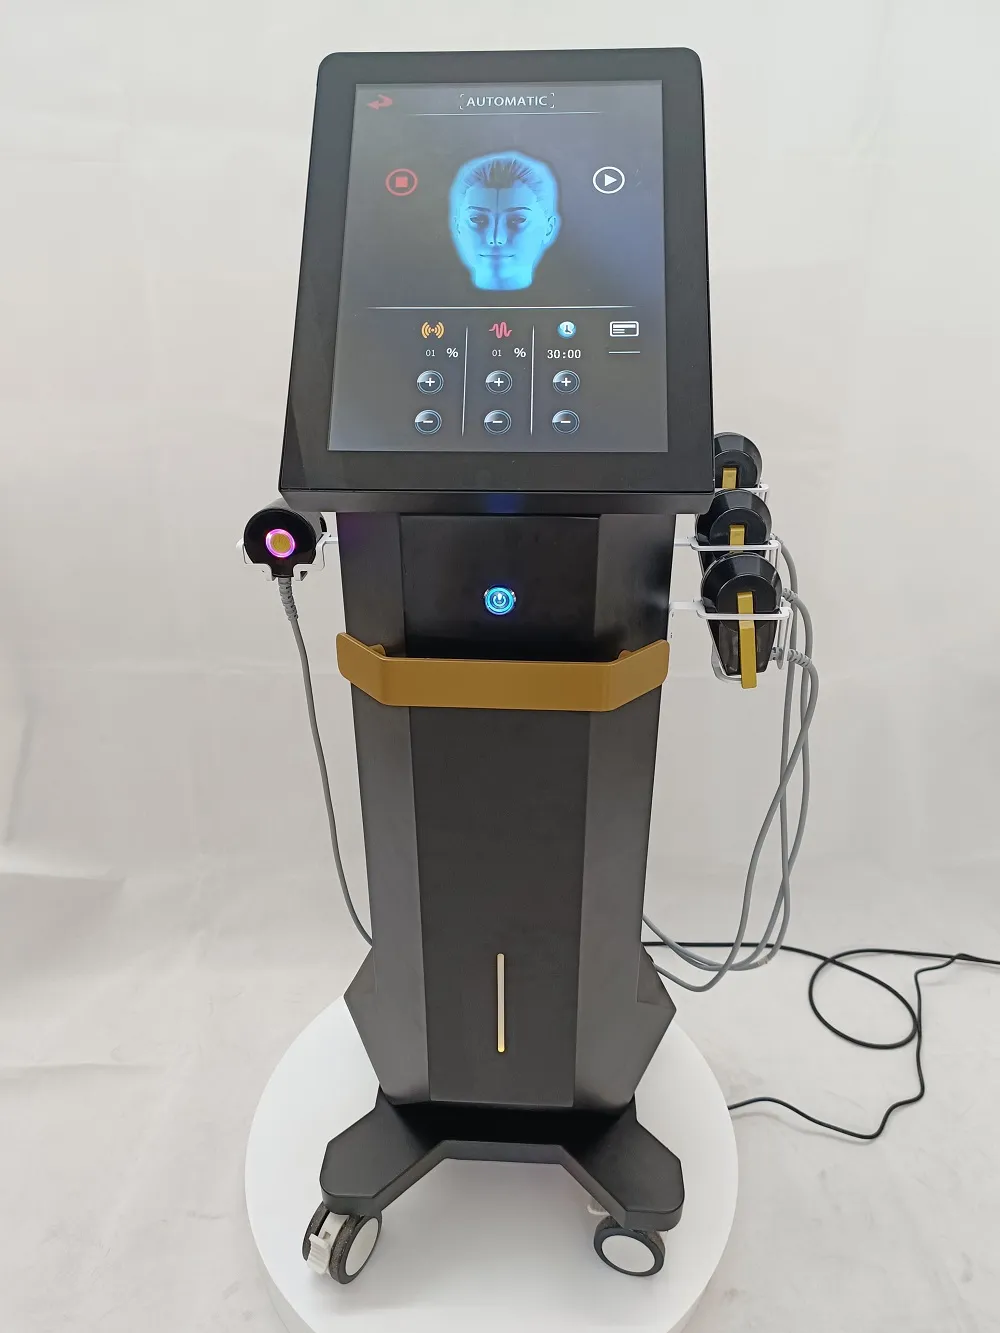 Electromagnetic Muscle Stimulation Facial Care PEface Ems Rf Machine Skin Tightening Face Neck Lifting Wrinkle Removal Device Ems face rf skin lift machine peface wrinkle removal device - Honkay ems face massager,ems face lift device,ems face machine,ems face lift machine,ems face